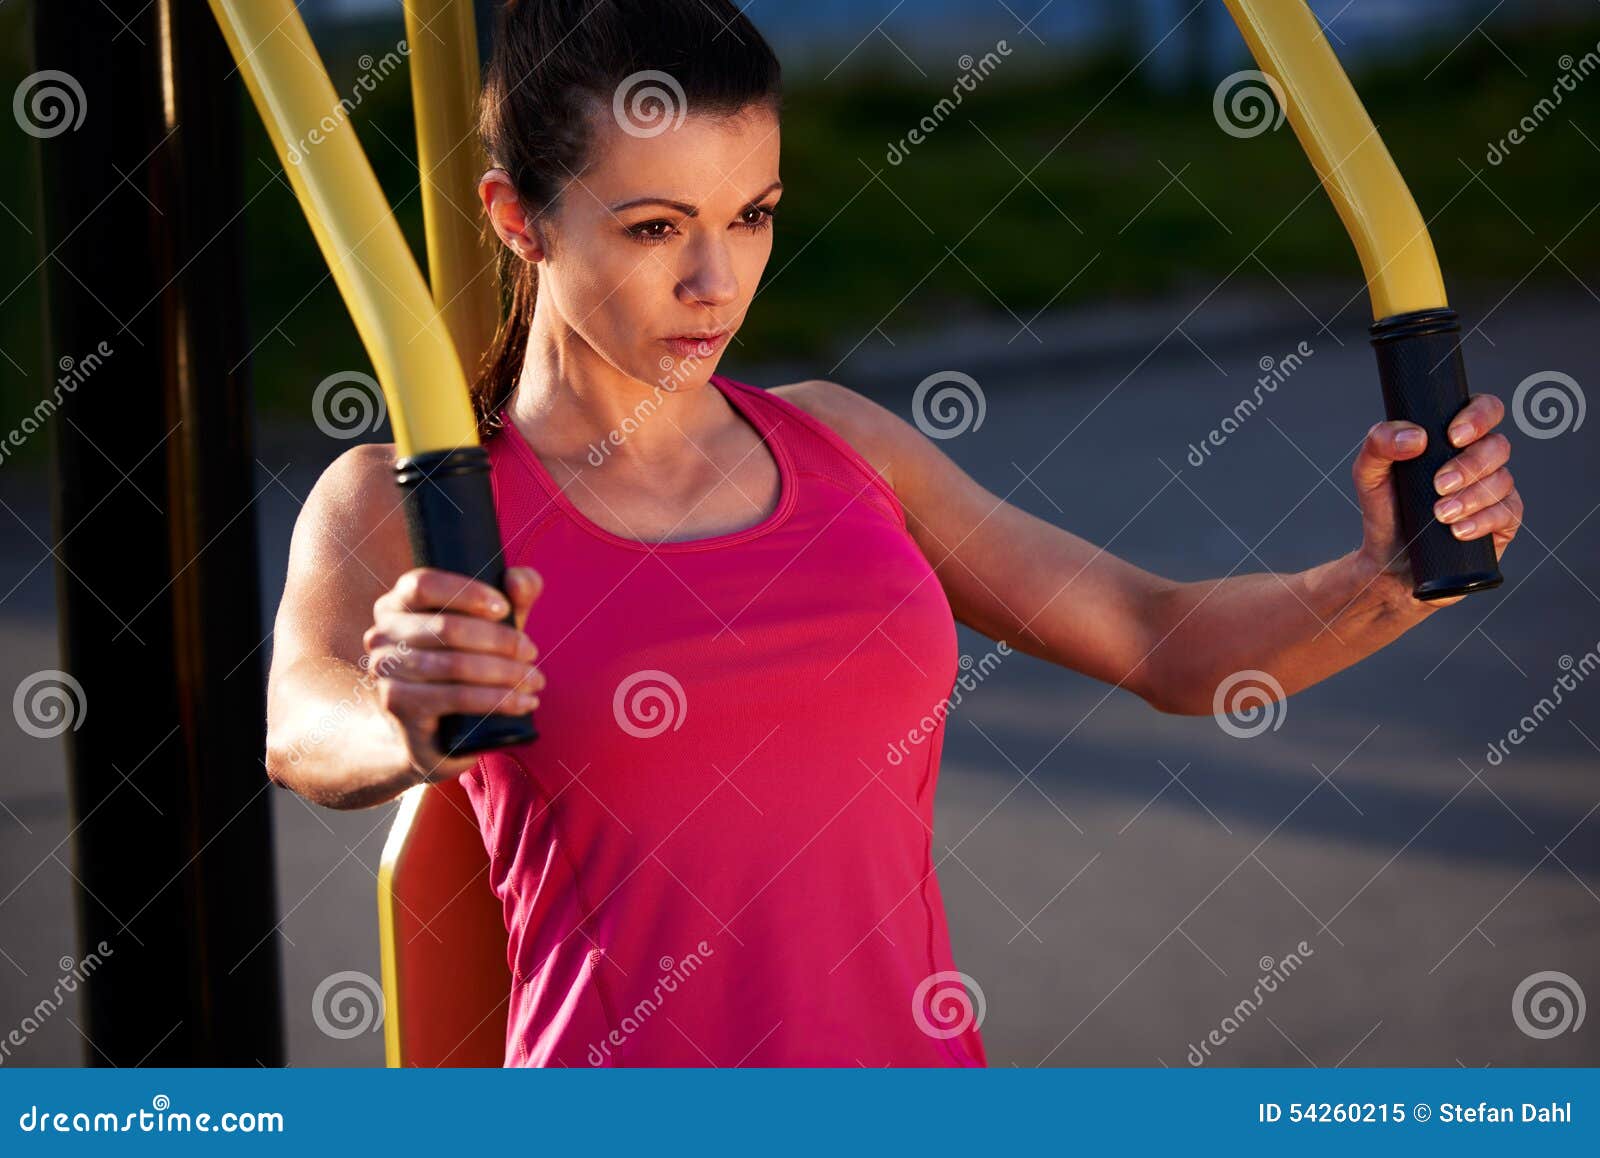 woman focussed while exercising upper body.